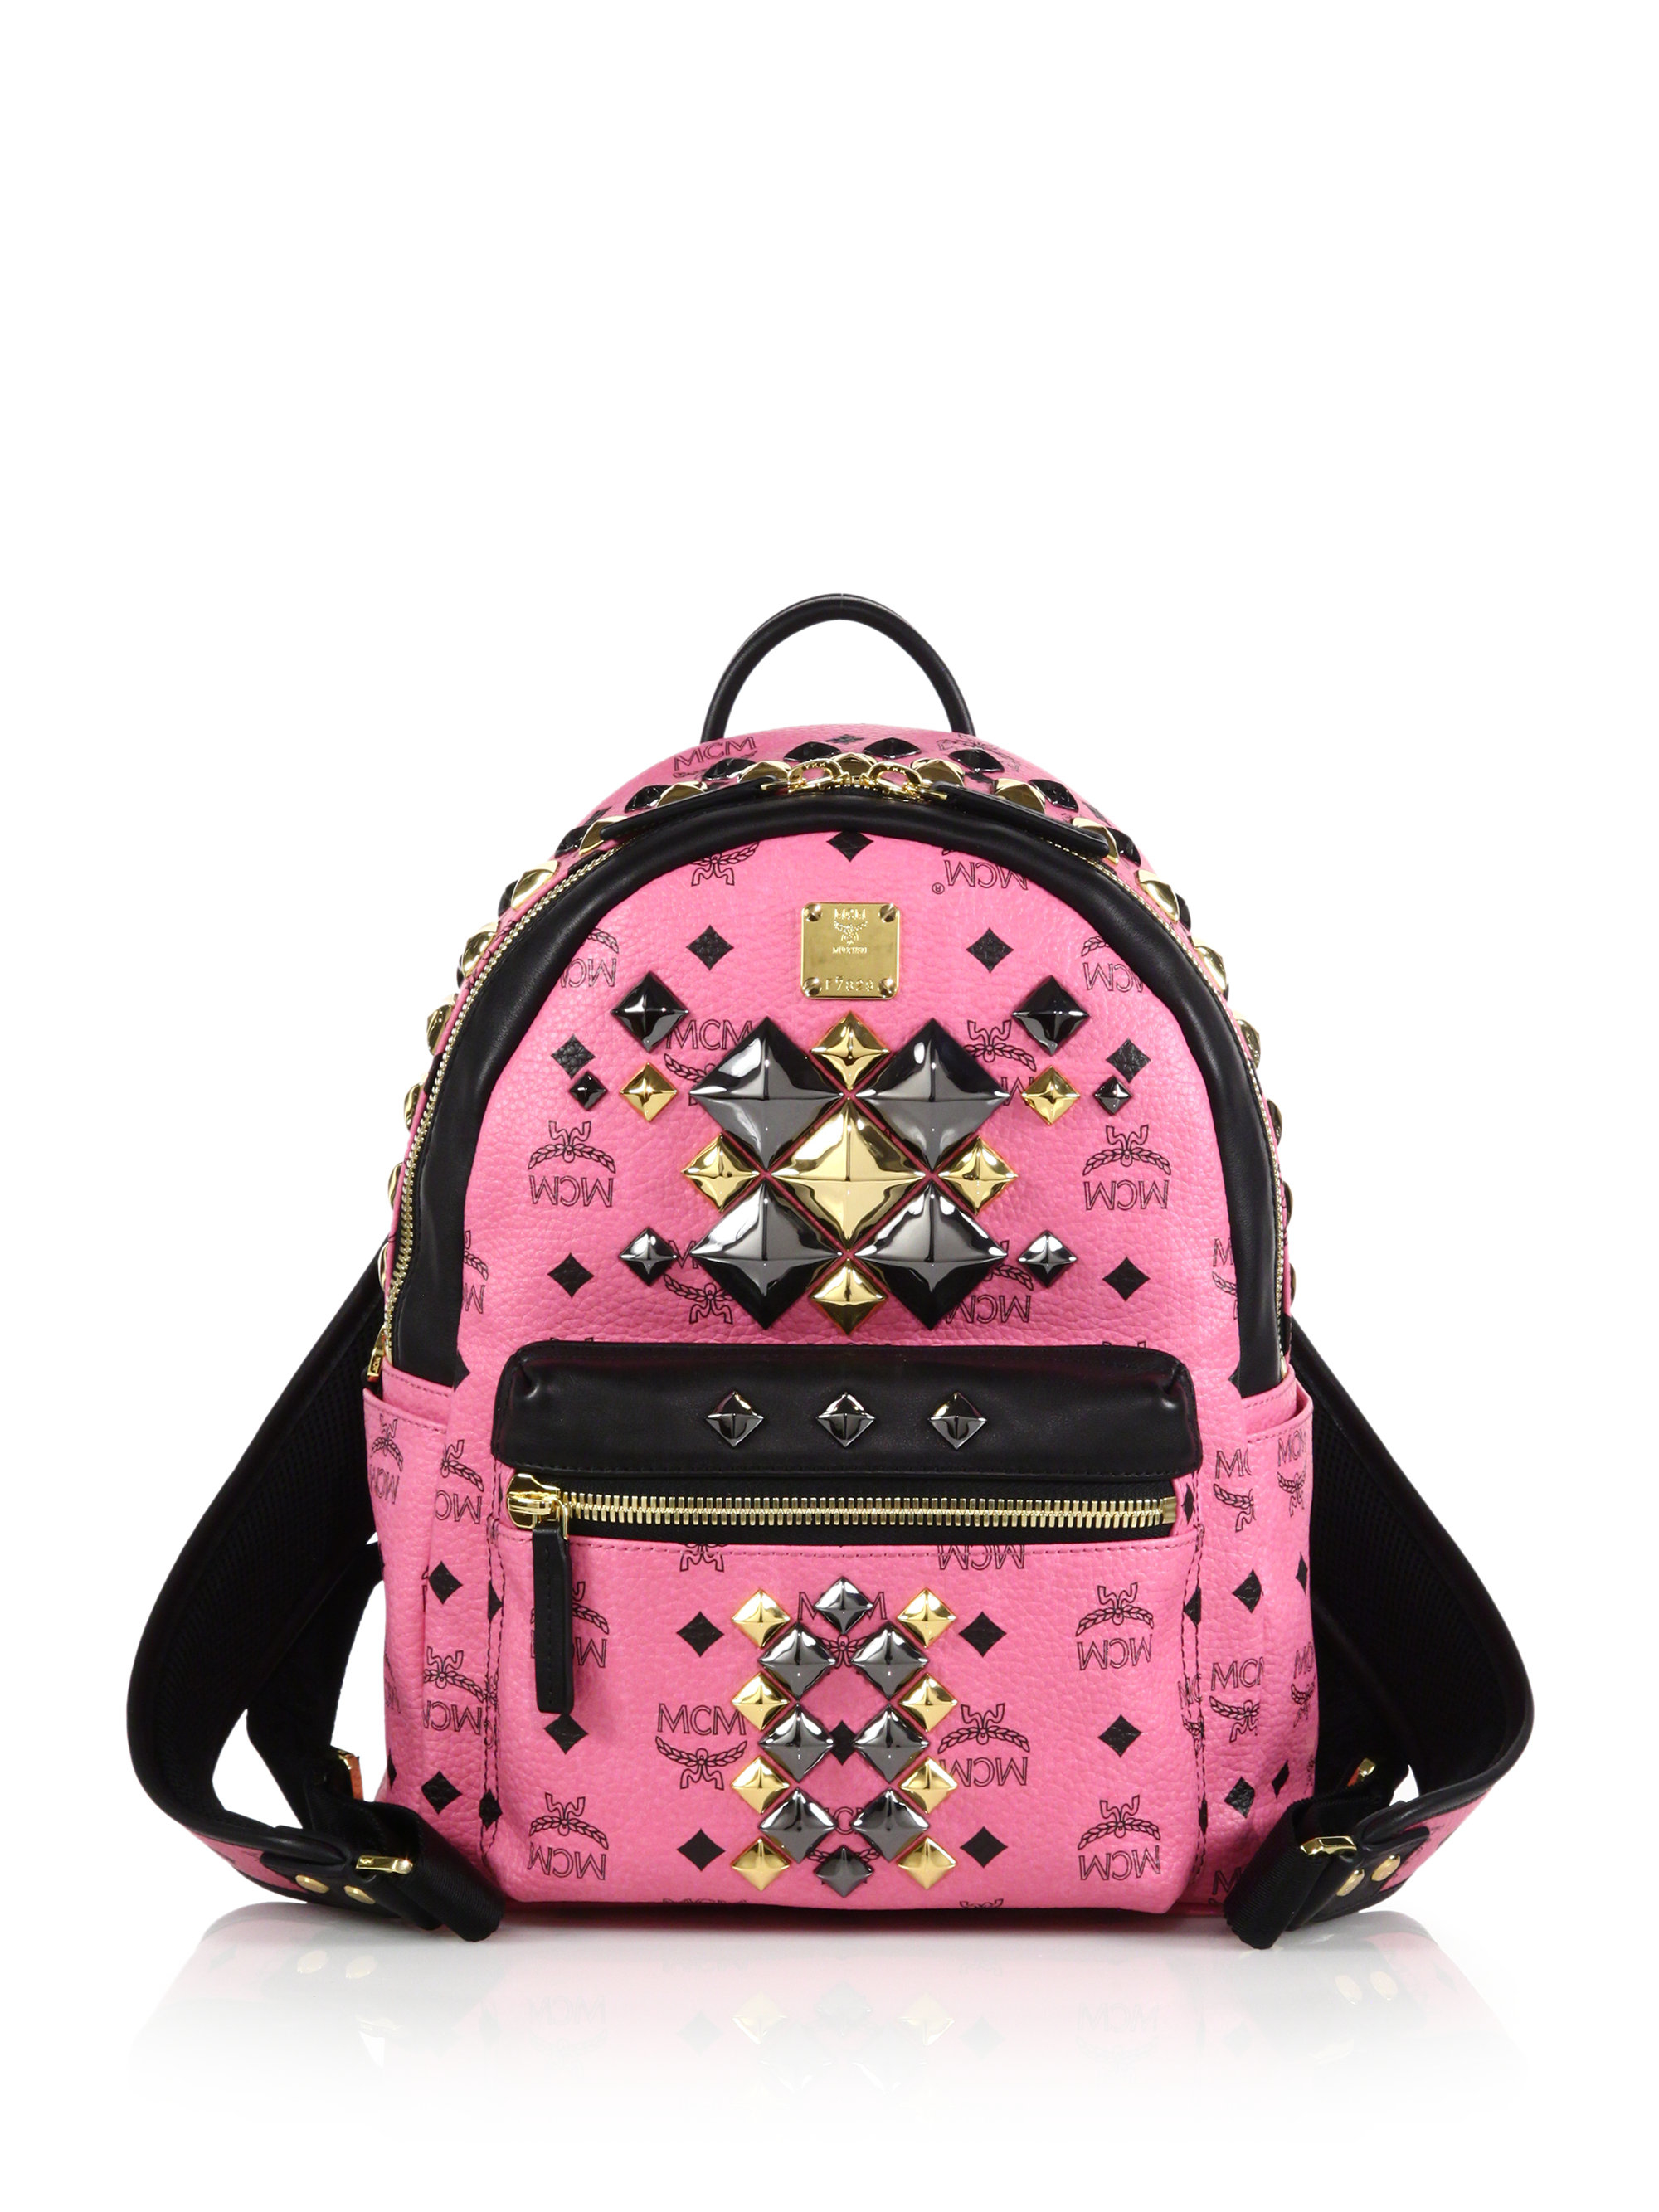 Lyst - Mcm Stark Brock Small Coated Canvas Backpack in Pink